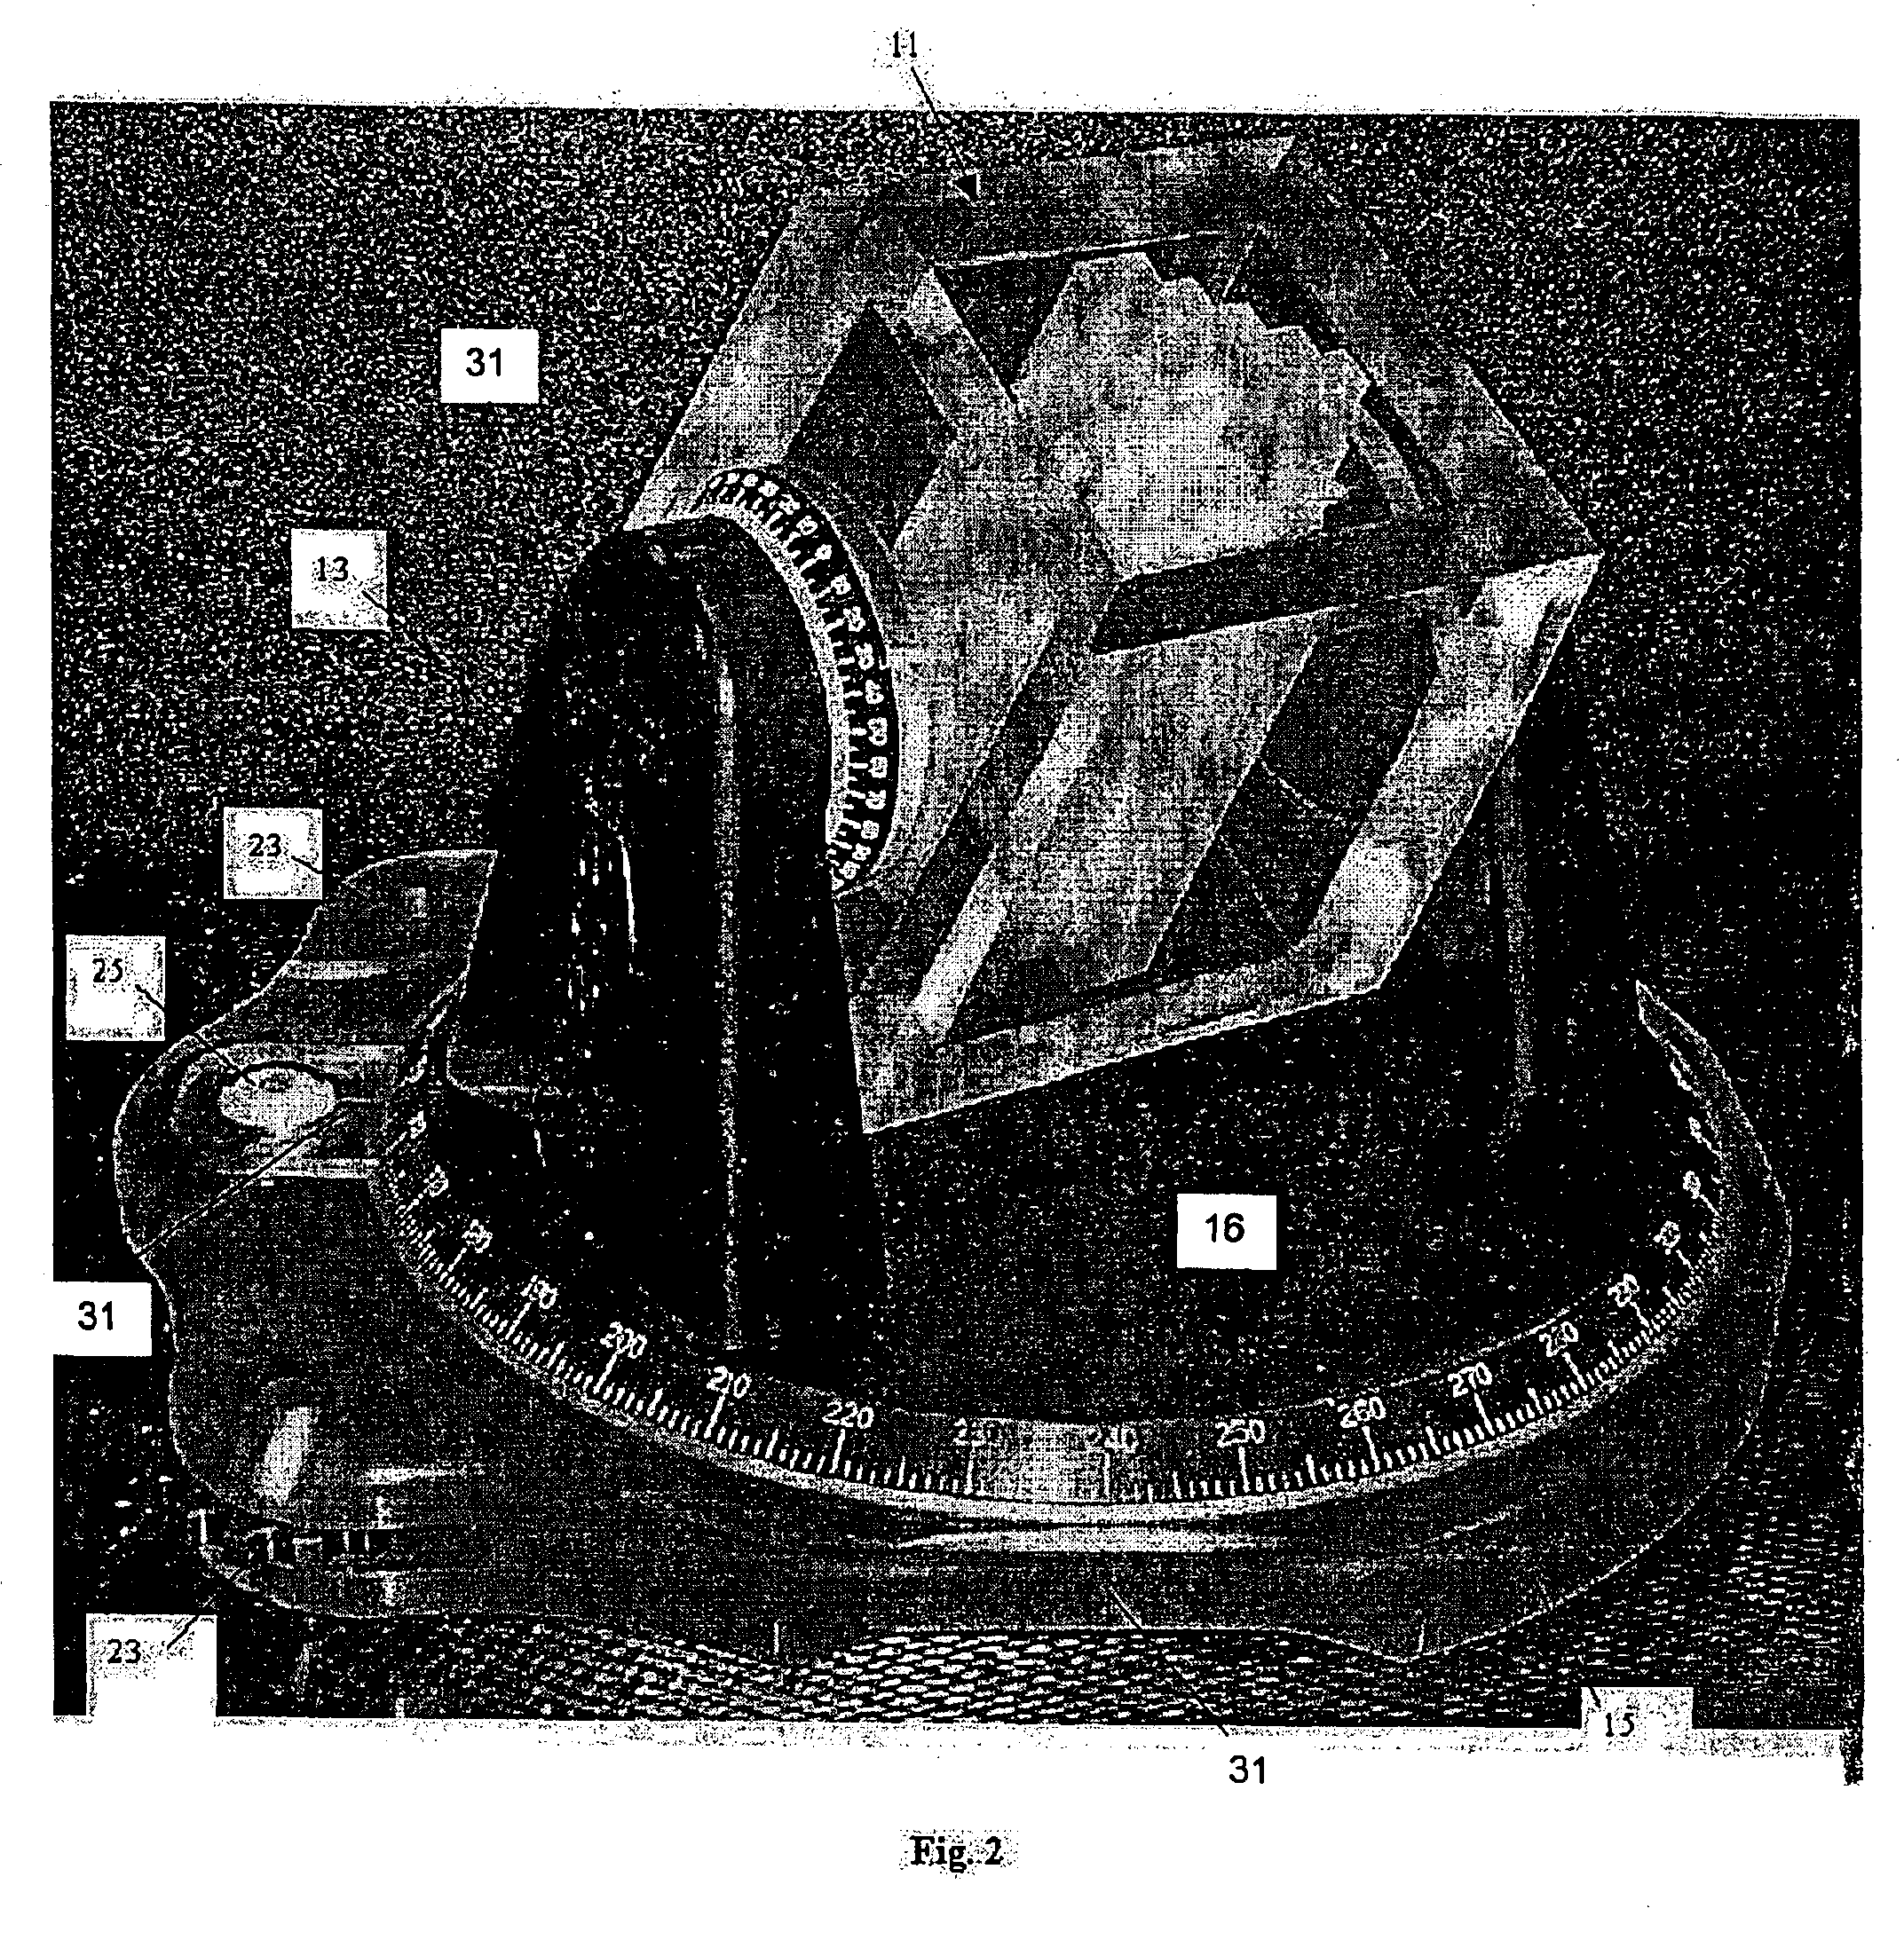 Phantom for evaluating nondosimetric functions in a multi-leaf collimated radiation treatment planning system